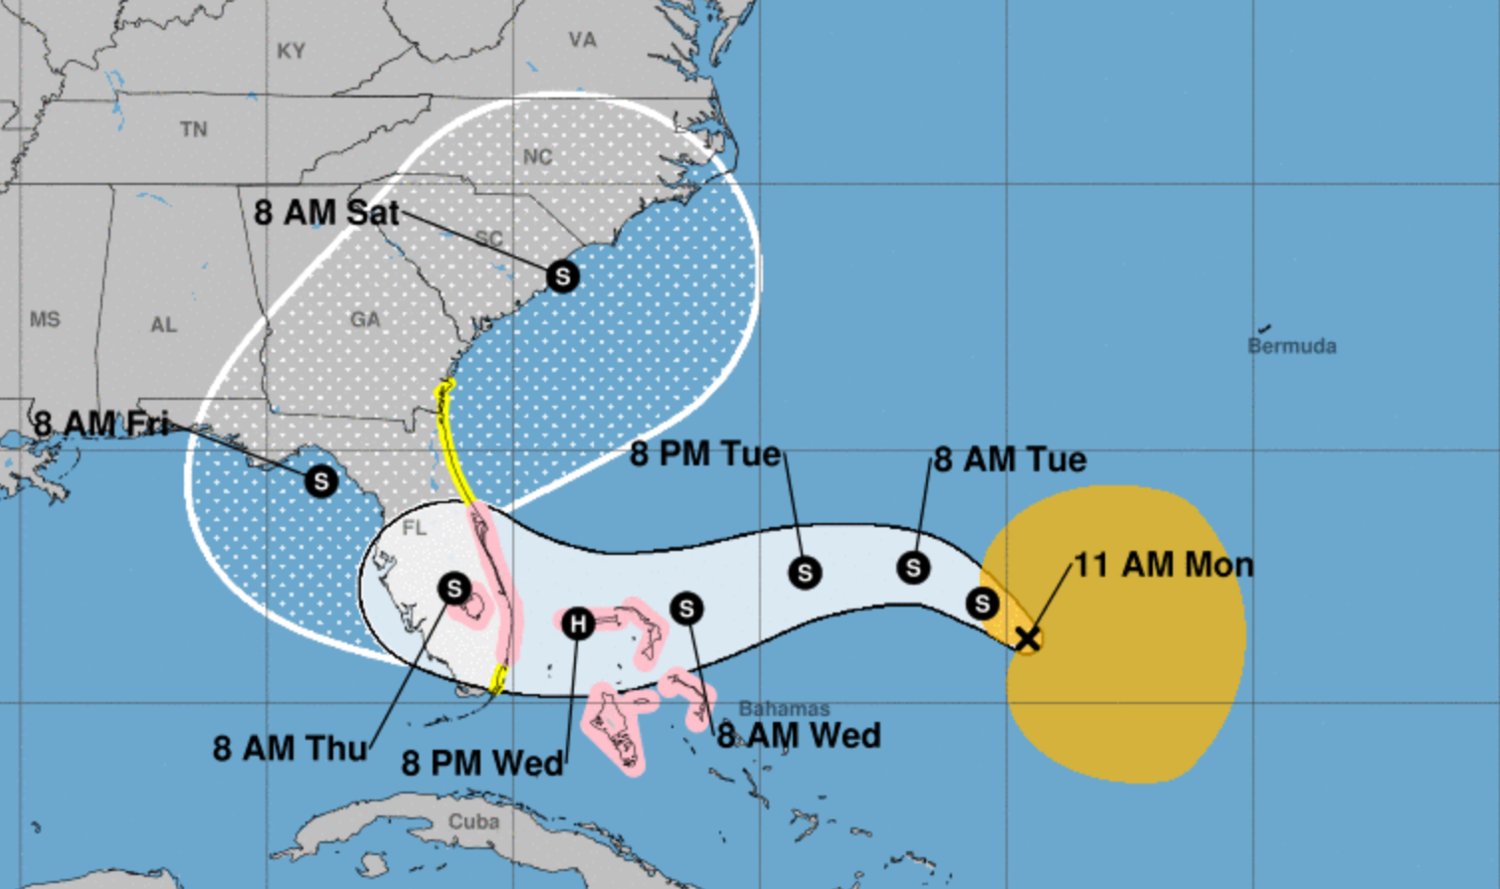 Much of Florida East Coast Under Tropical Storm or Hurricane Watch